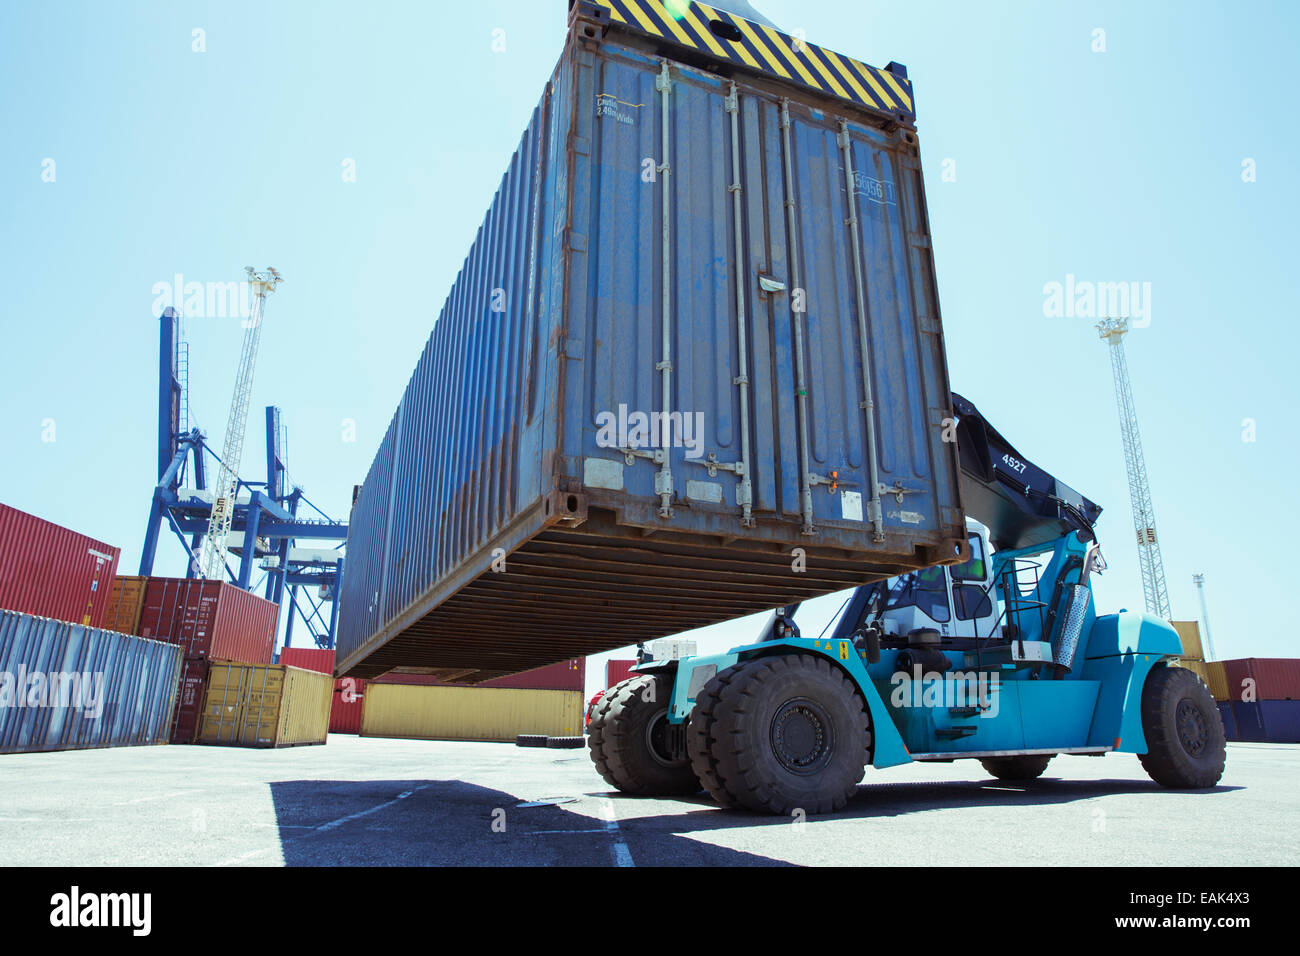 Low angle view of crane lifting cargo container Banque D'Images